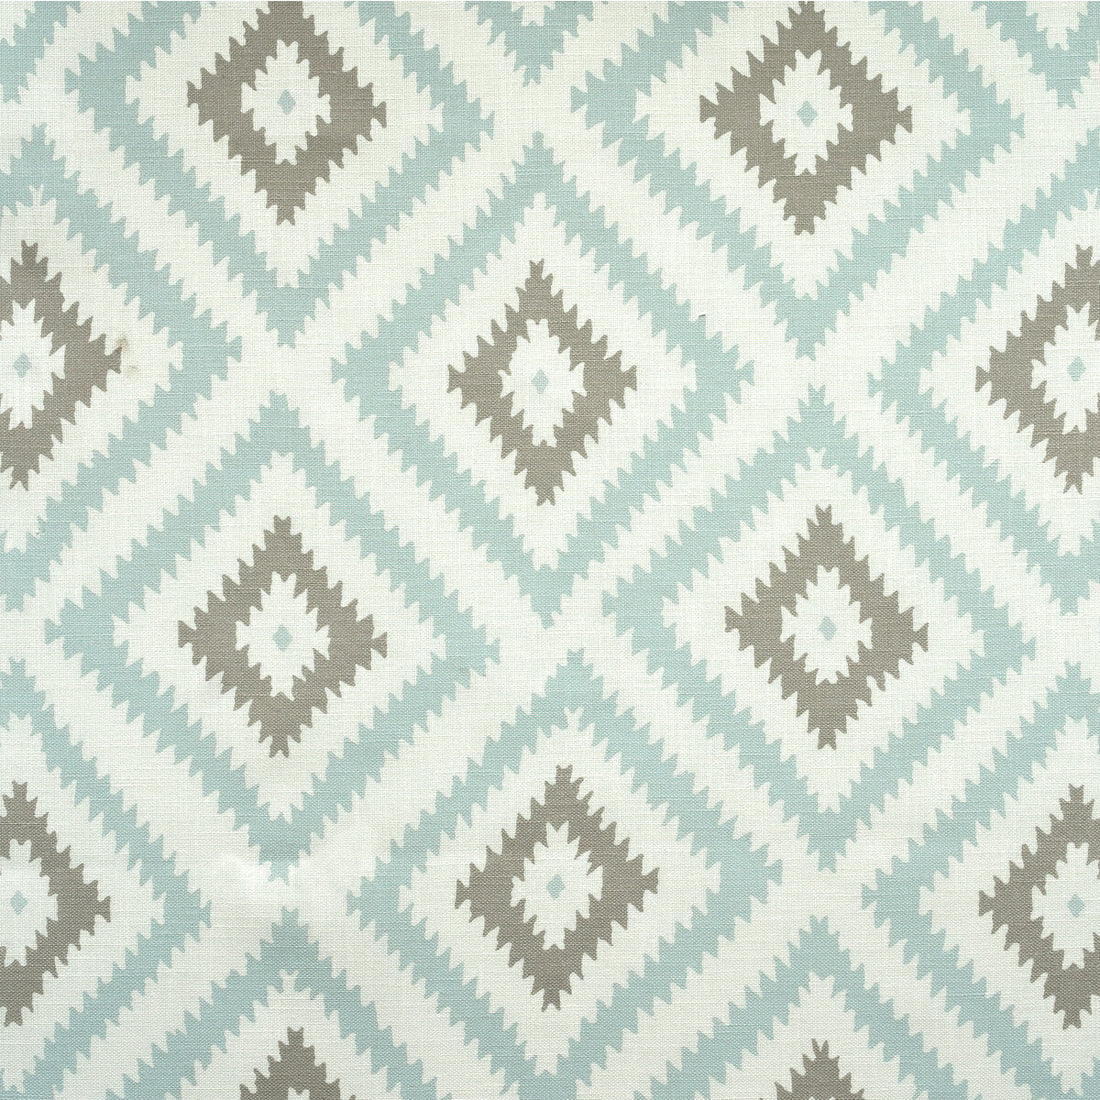 Glacier Outdoor fabric in ice color - pattern AM100348.1511.0 - by Kravet Couture in the Andrew Martin The Great Outdoors collection